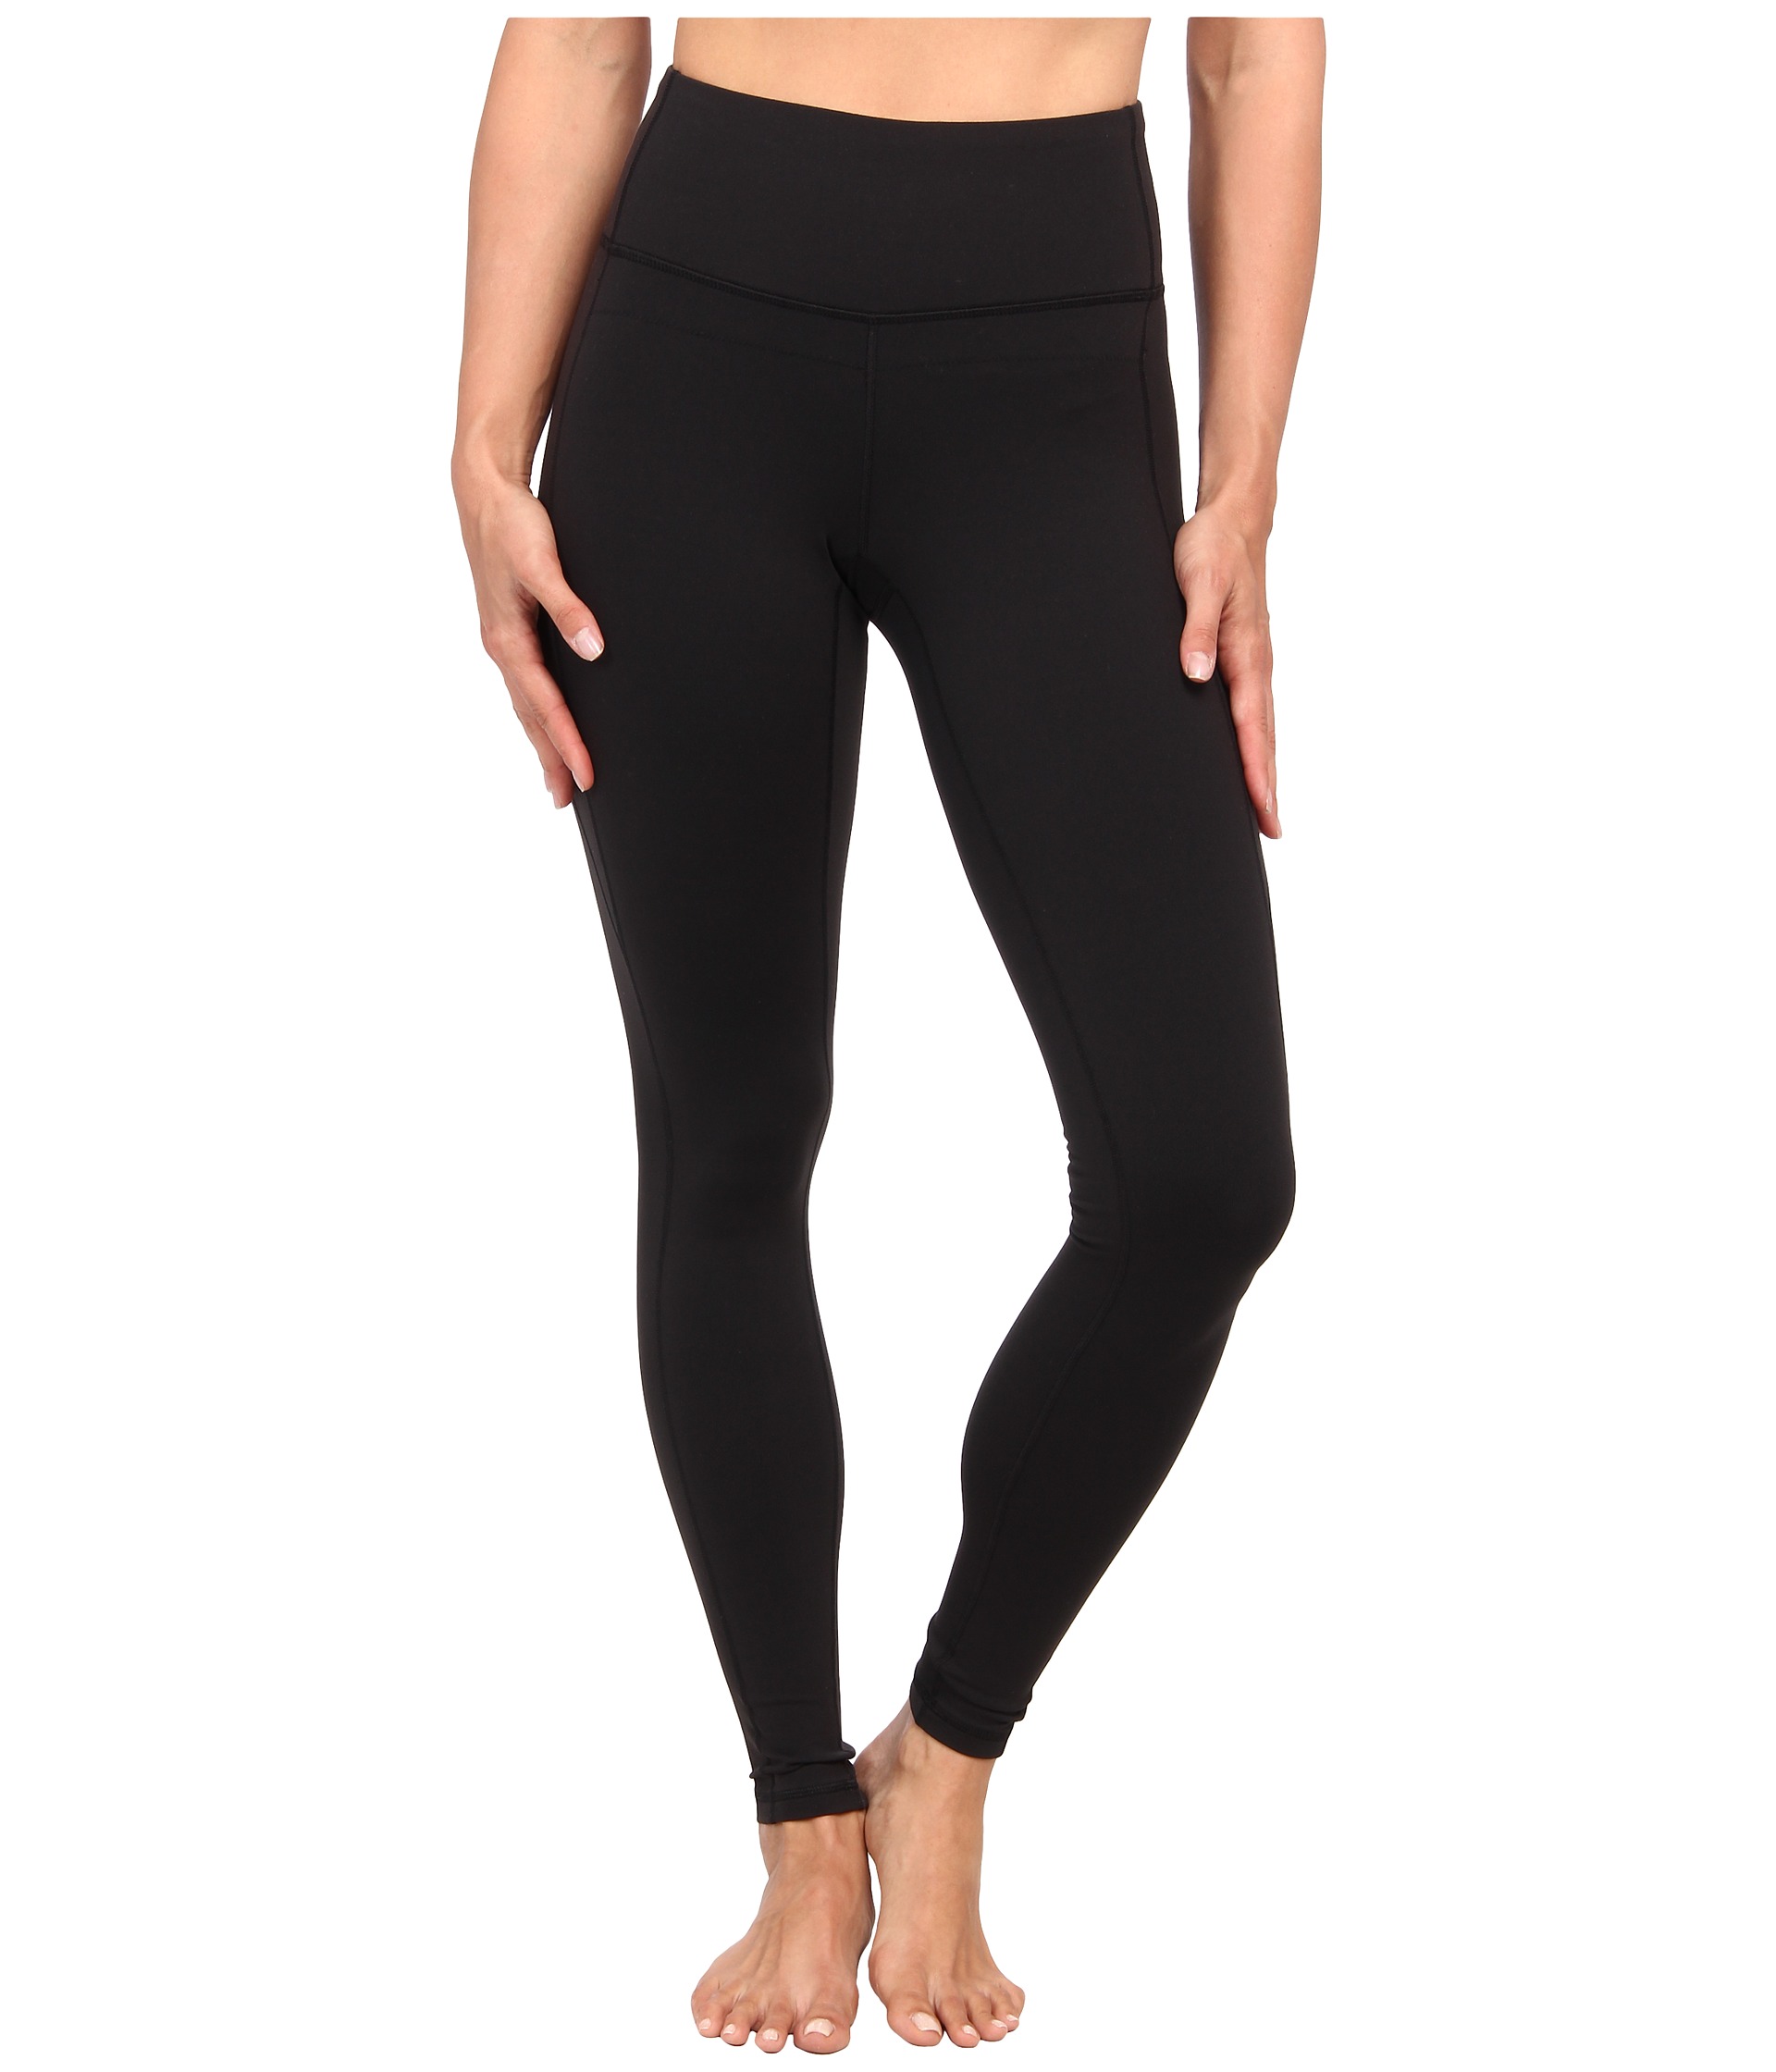 Lucy Perfect Core Legging Lucy Black 2 - Zappos.com Free Shipping BOTH Ways